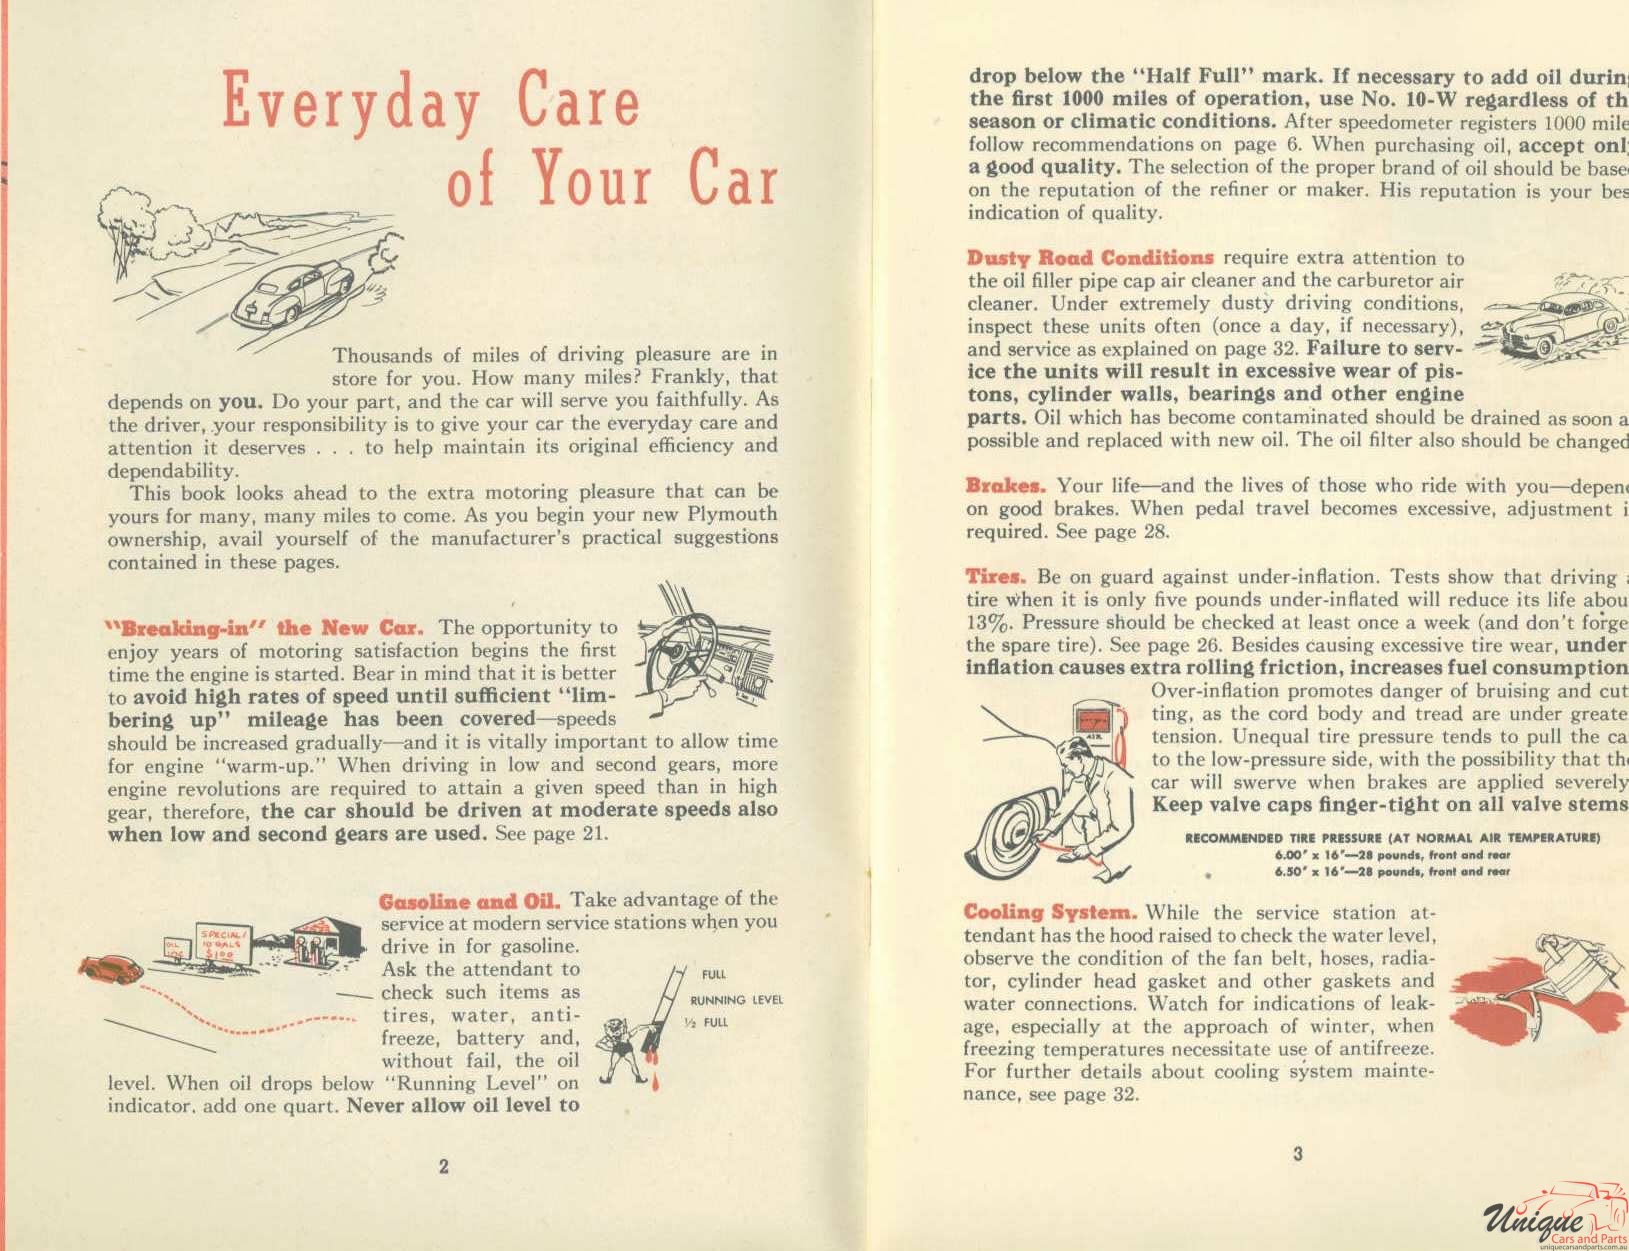 1948 Plymouth Owners Manual Page 22